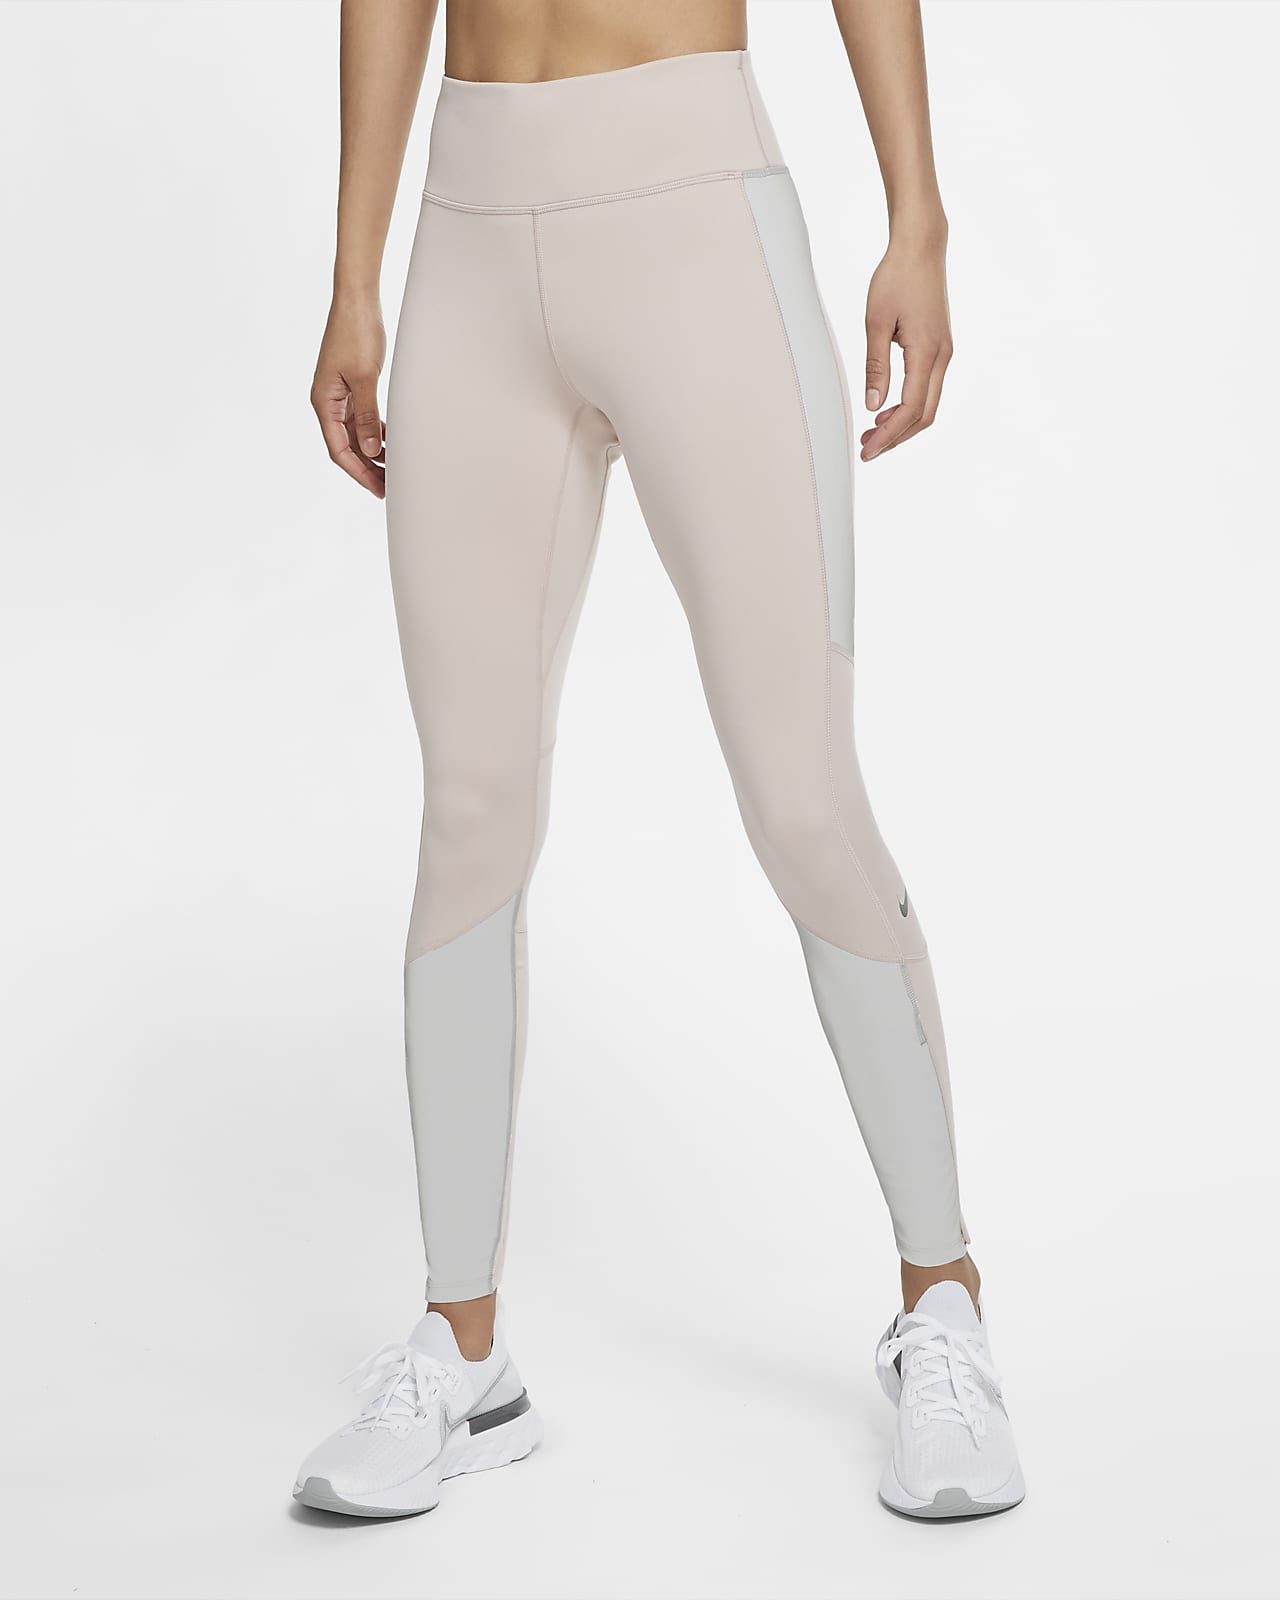 nike epic lux flash women's running tights